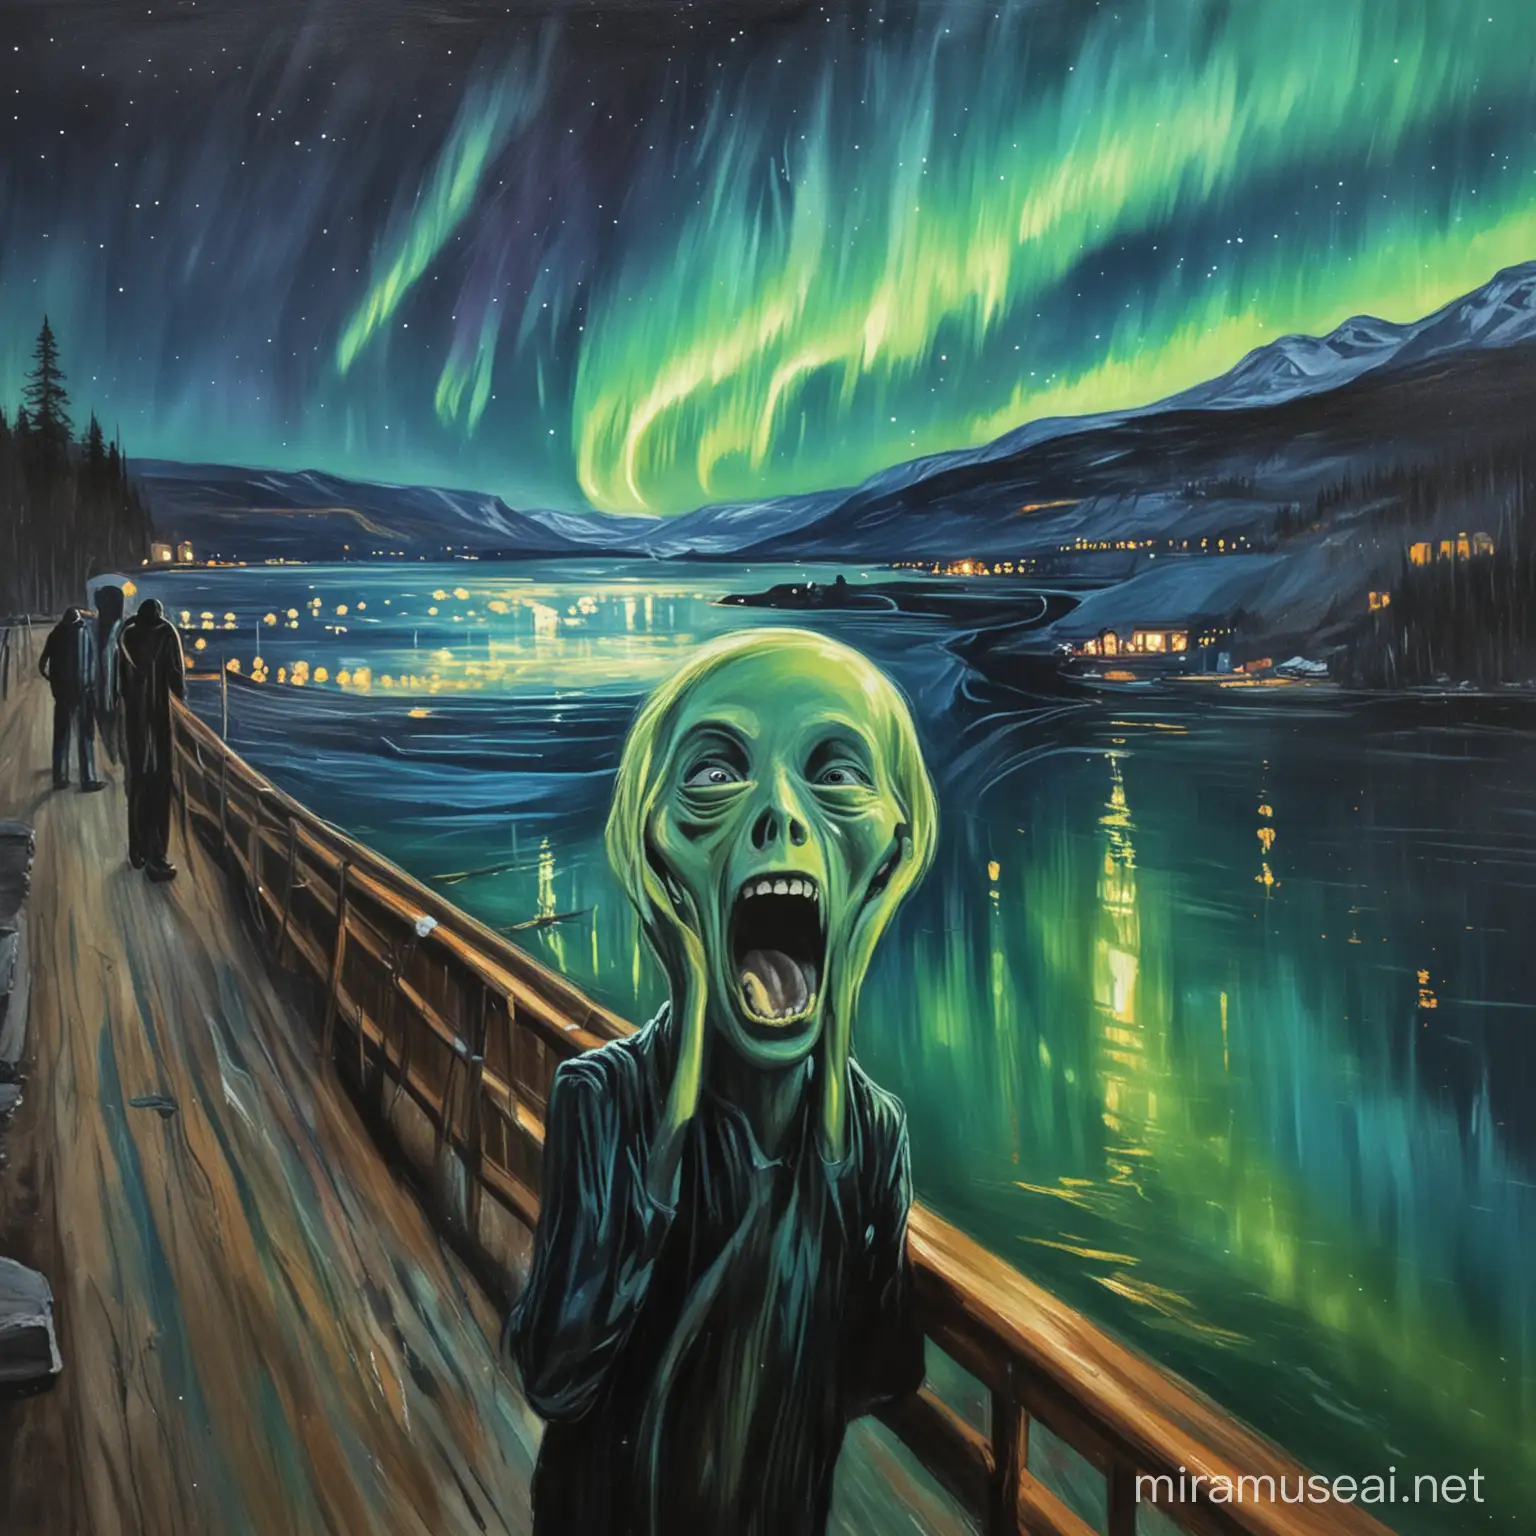 Smiling Face in Northern Lights Inspired The Scream Painting